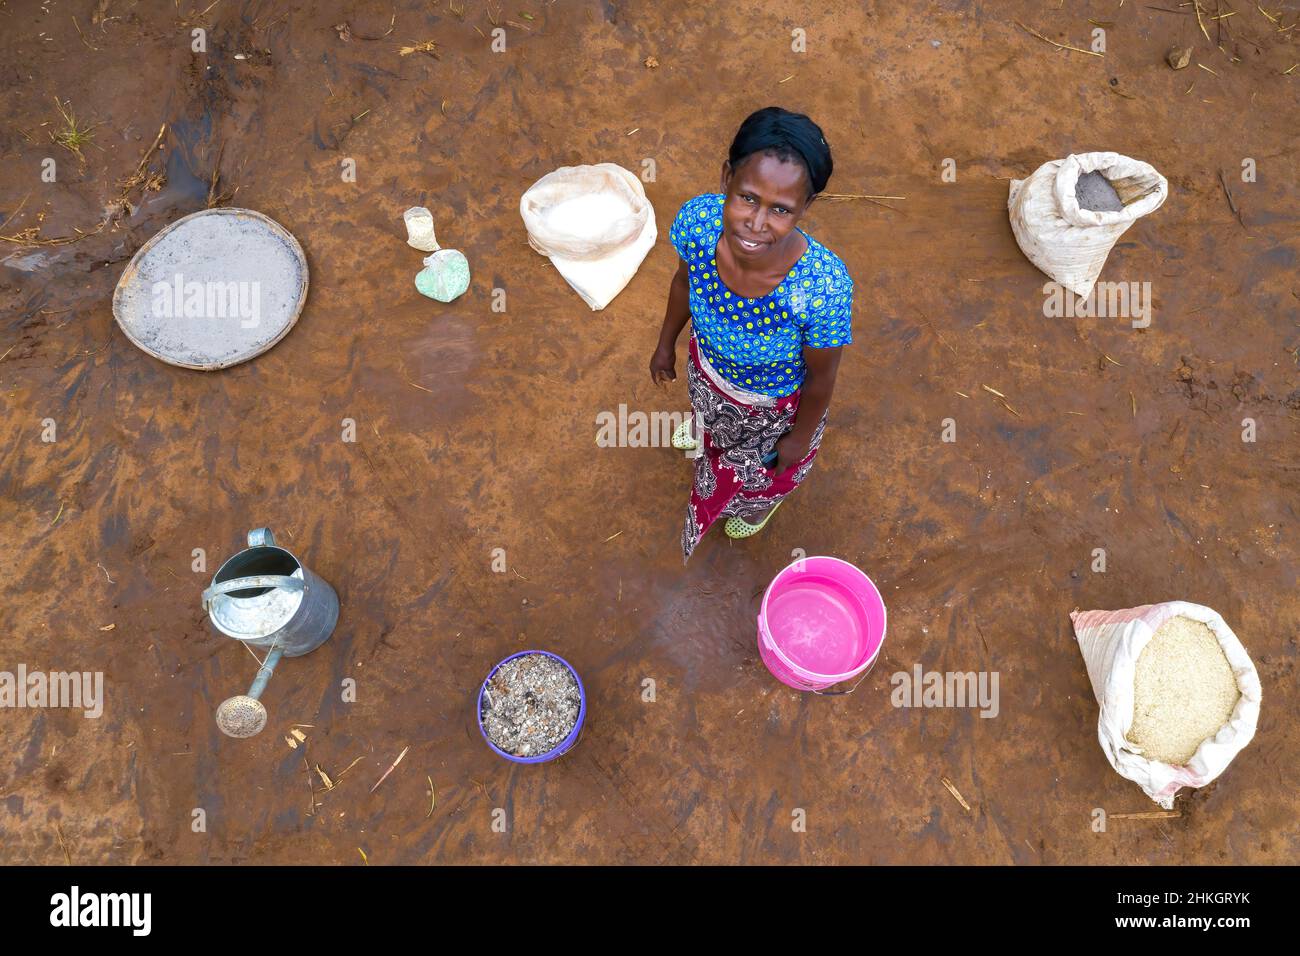 Woman farmer with ingredients for organic fertilizers, Malawi Stock Photo